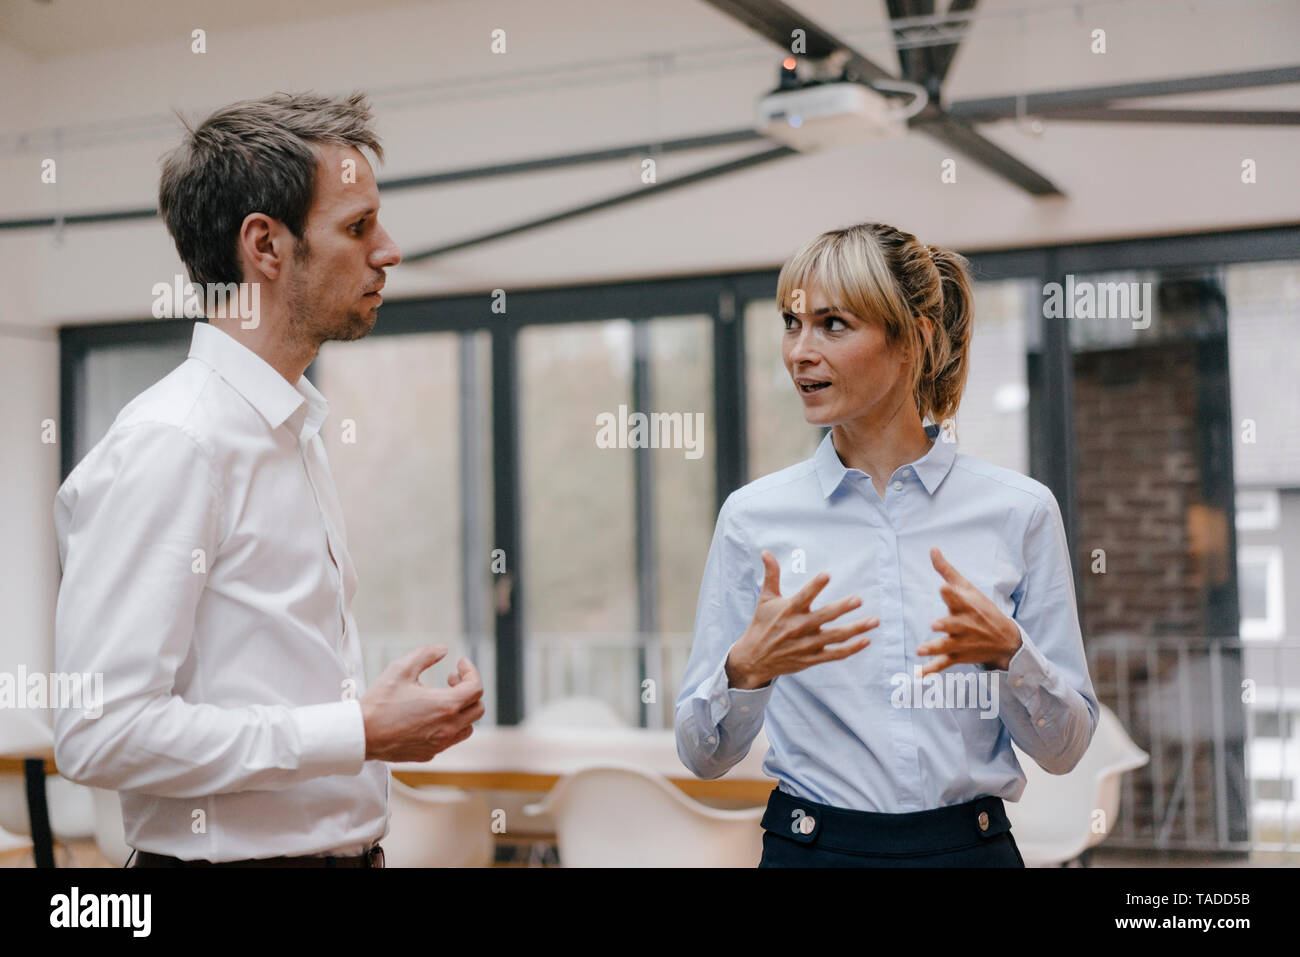 Businessman and woman standing in office, discussing Stock Photo